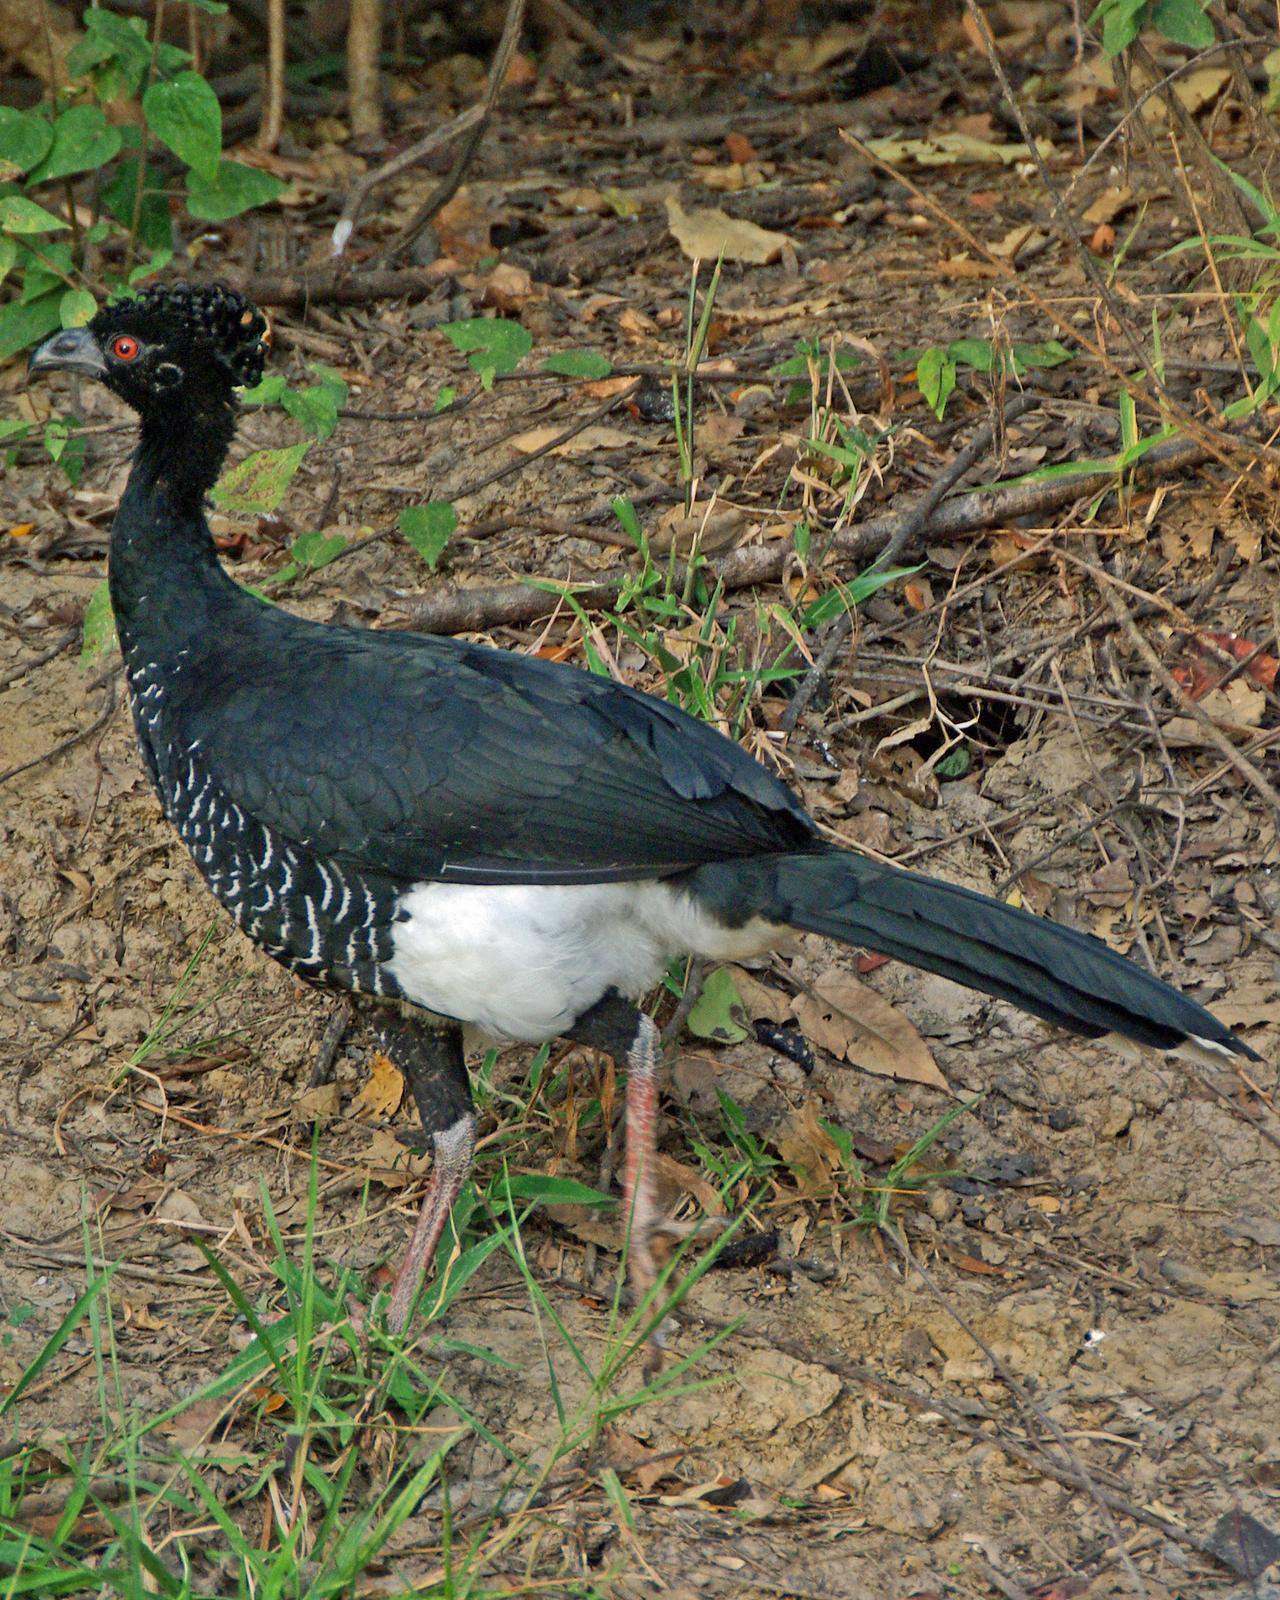 Yellow-knobbed Curassow Photo by Robert Polkinghorn